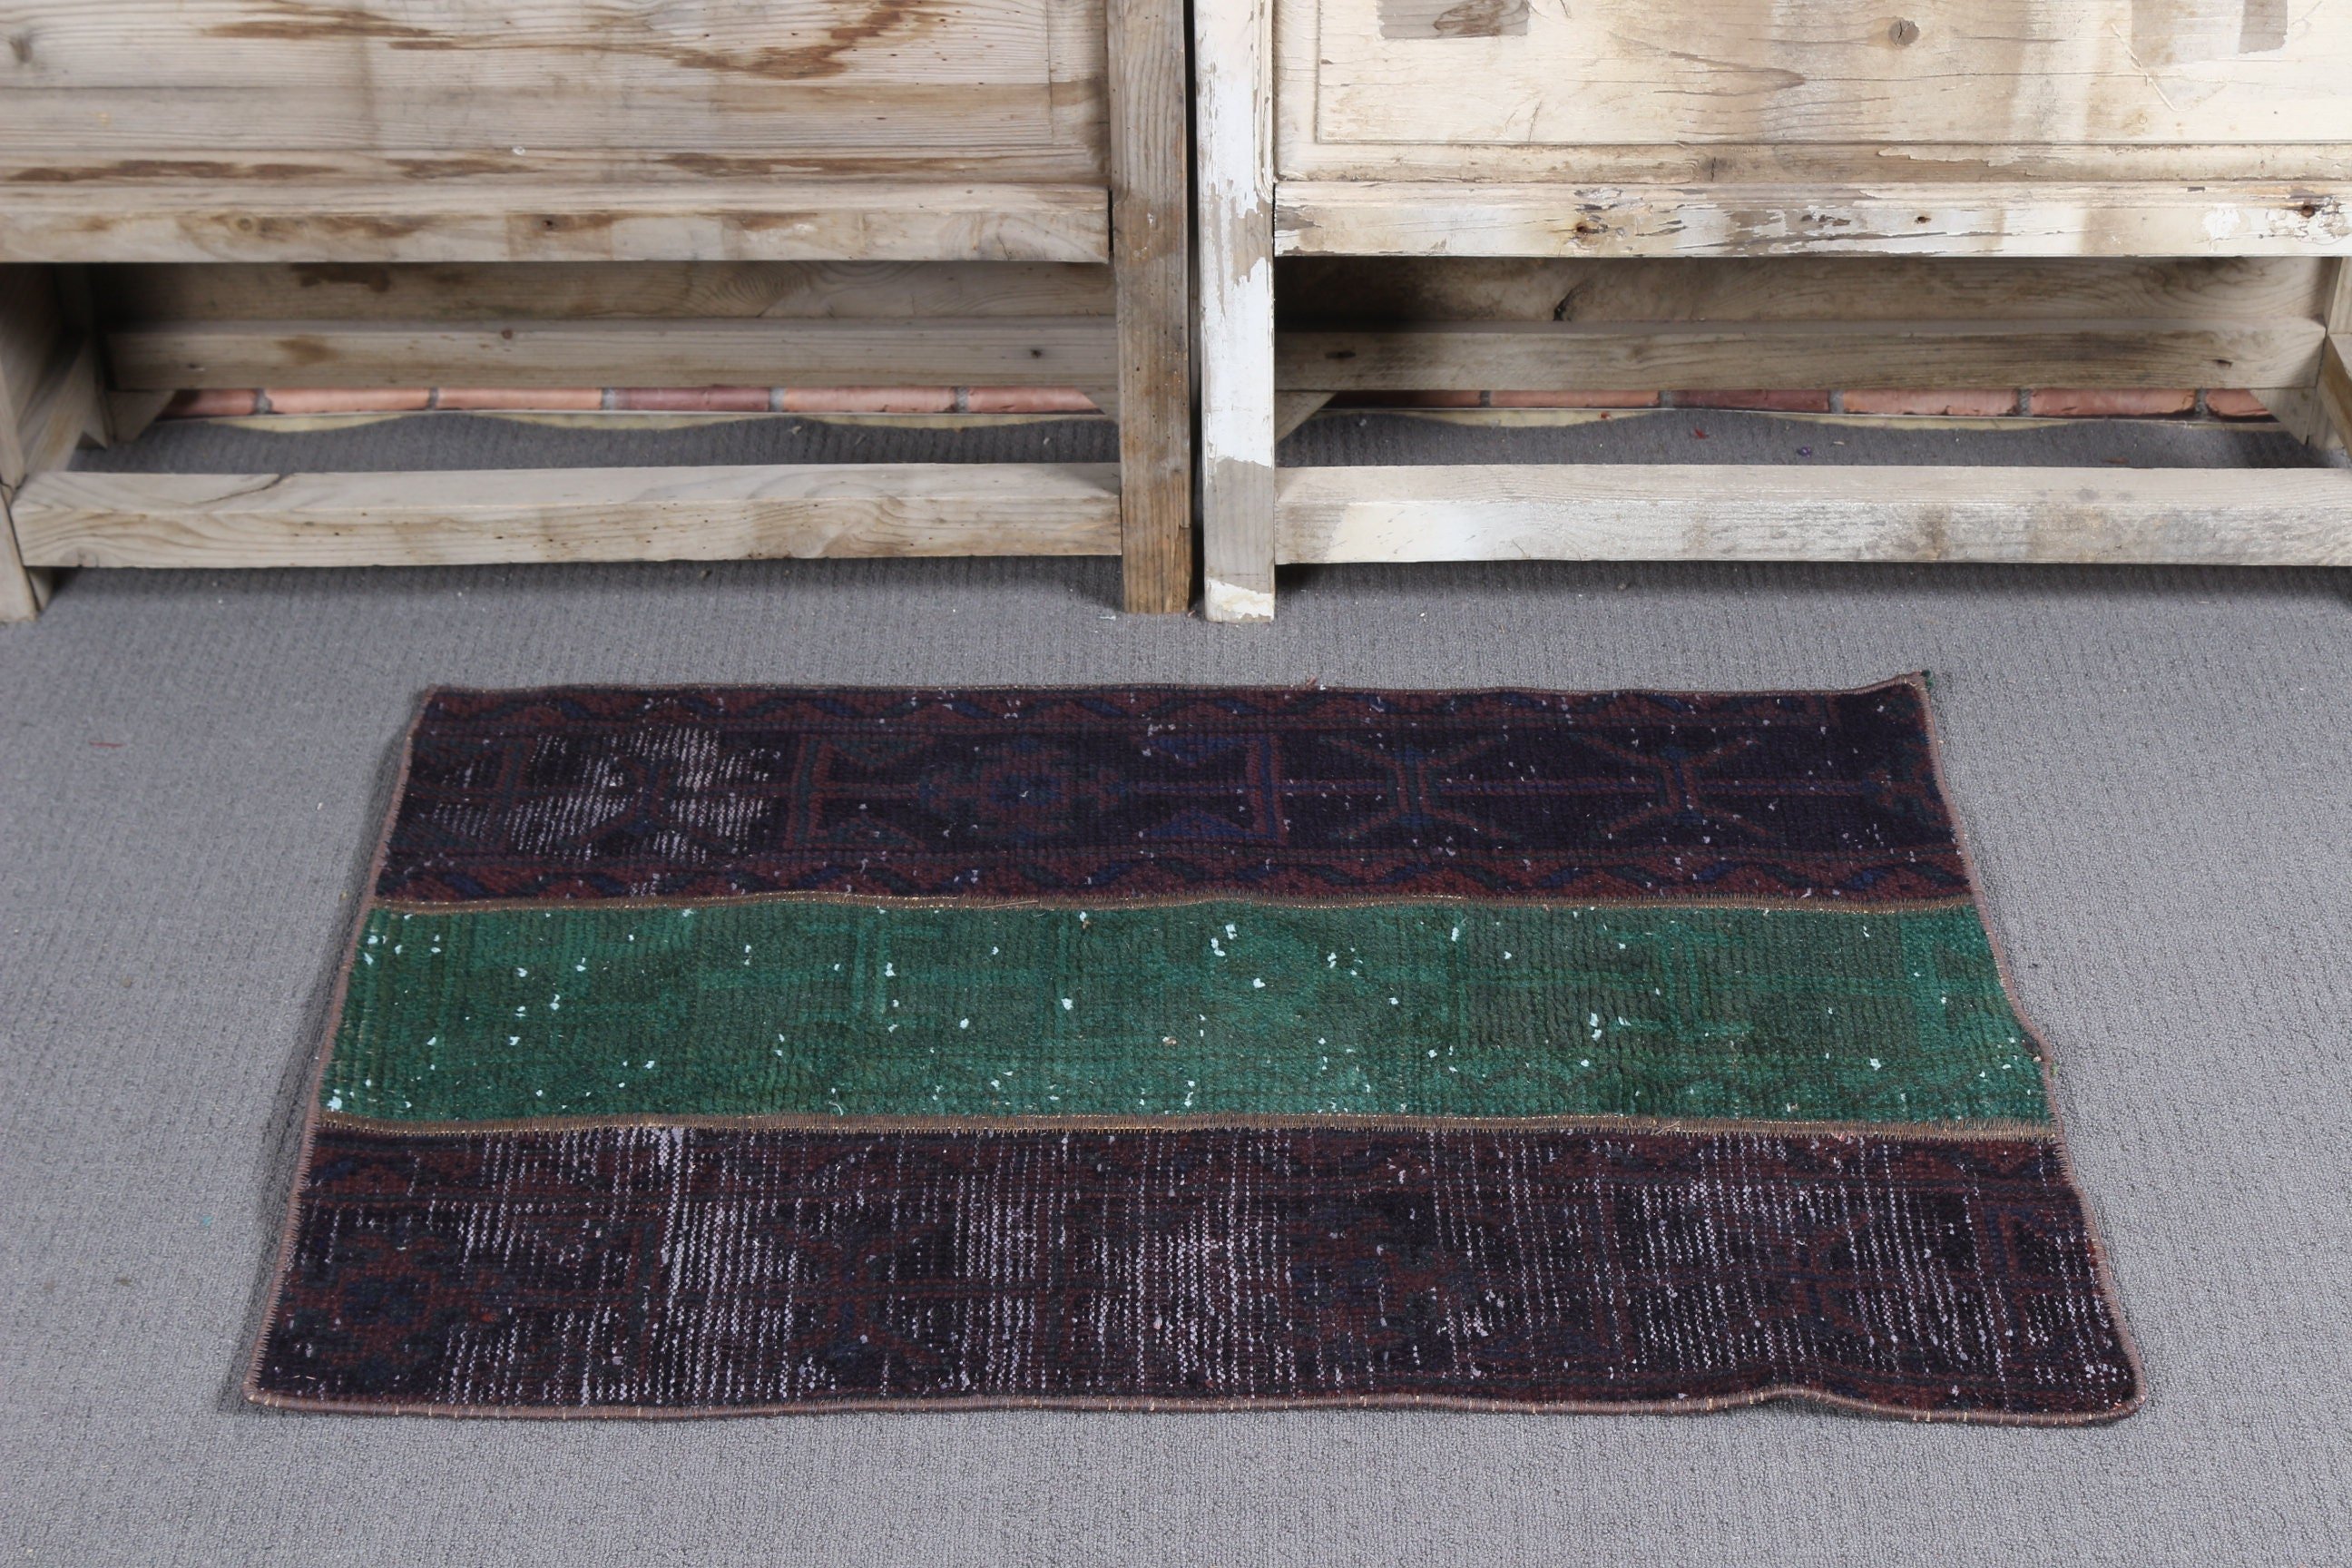 Green Kitchen Rug, Turkish Rug, Cool Rugs, Wall Hanging Rug, Vintage Rug, 2x3.1 ft Small Rugs, Bedroom Rug, Car Mat Rug, Rugs for Car Mat